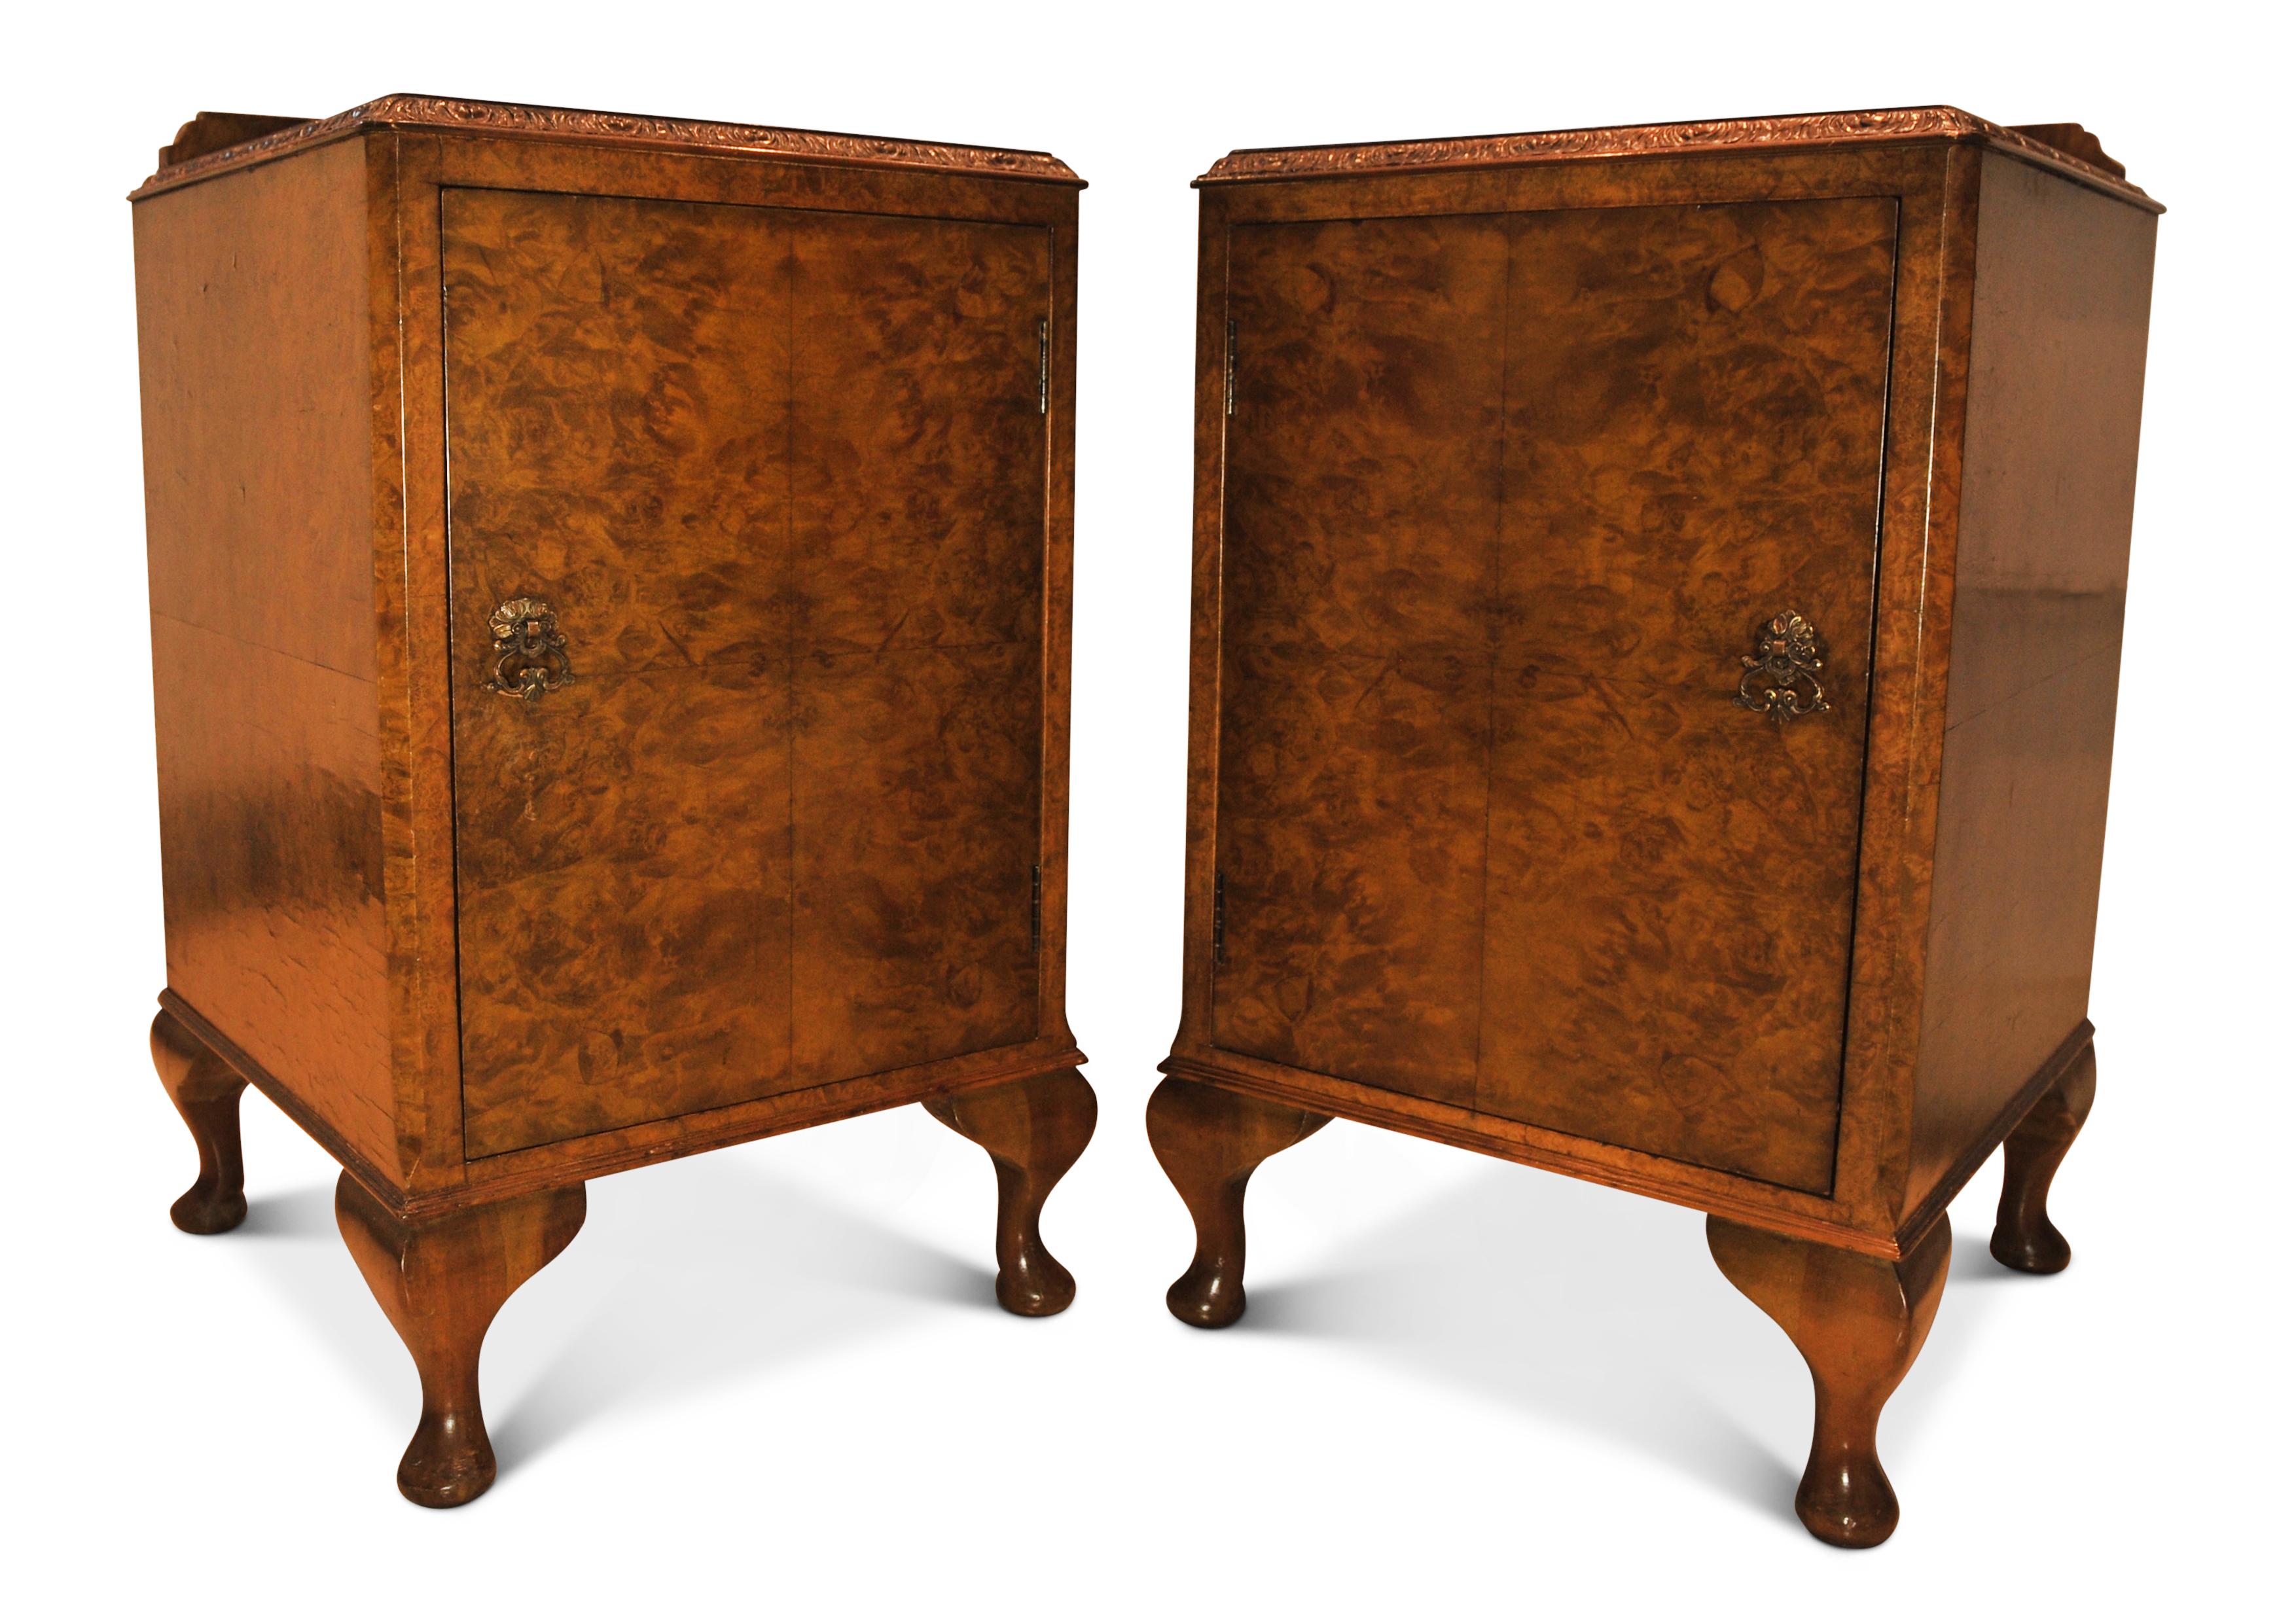 An Elegant  Matching Pair of Art Deco Burr Walnut Night Stands With Cabriole Legs & Figured Walnut Fronts

Height to top of the lip 72.3cm
Height to cupboard surface 68.5cm

Internal height 46.5cm
Internal width 35cm
Internal depth 42cm 